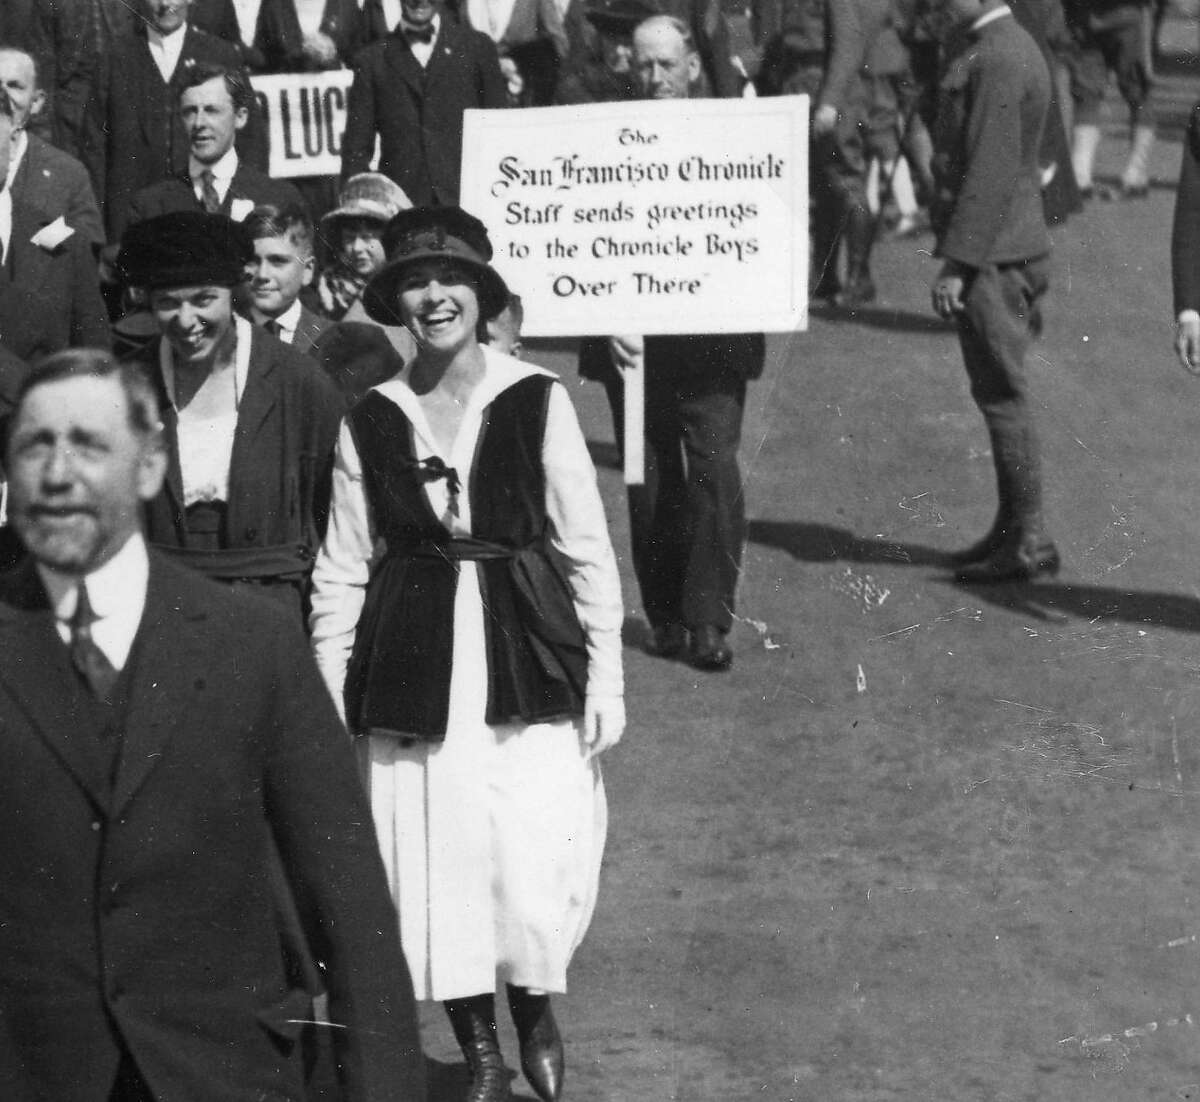 Chronicle owner Michael De Young arranged for director Thomas Ince to film thousands of San Franciscaens on parade in Golden Gate Park waving and carrying signs to encourage troops fighting overseas in World War I